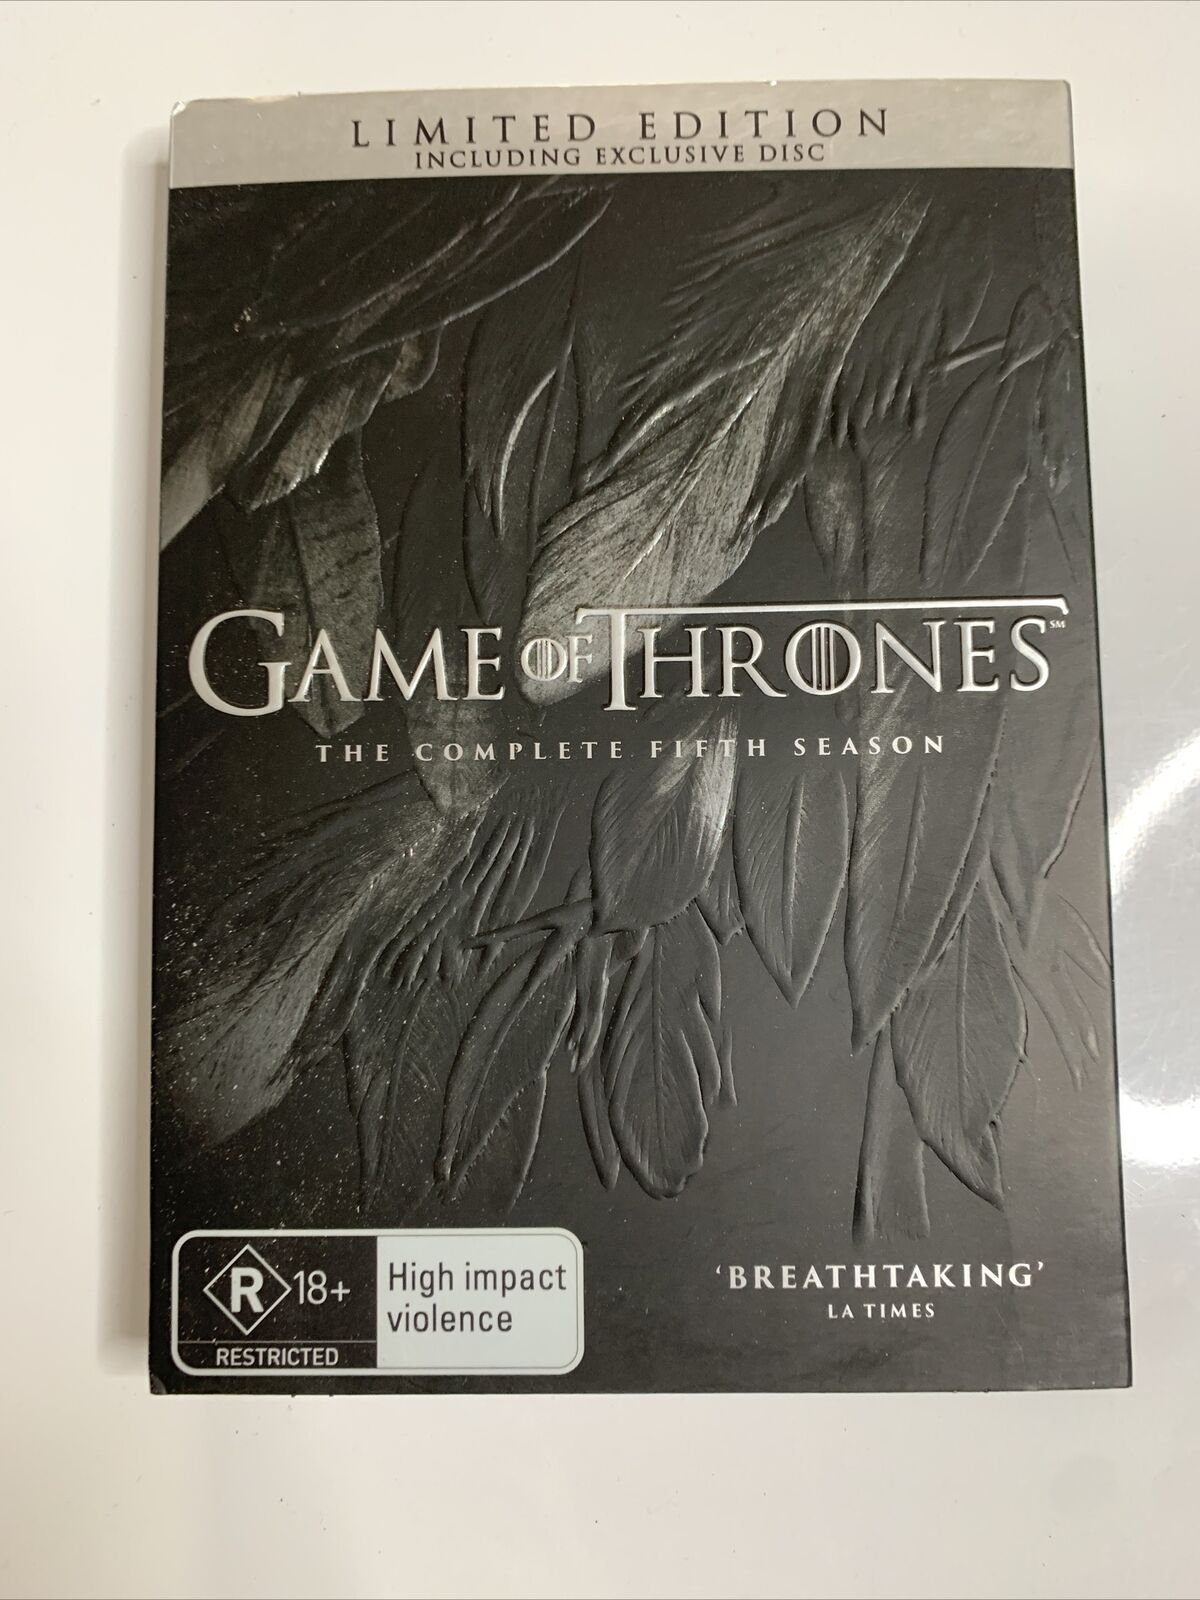 Game Of Thrones - The Complete Season 5 Limited Edition (DVD, 2016) Region 4